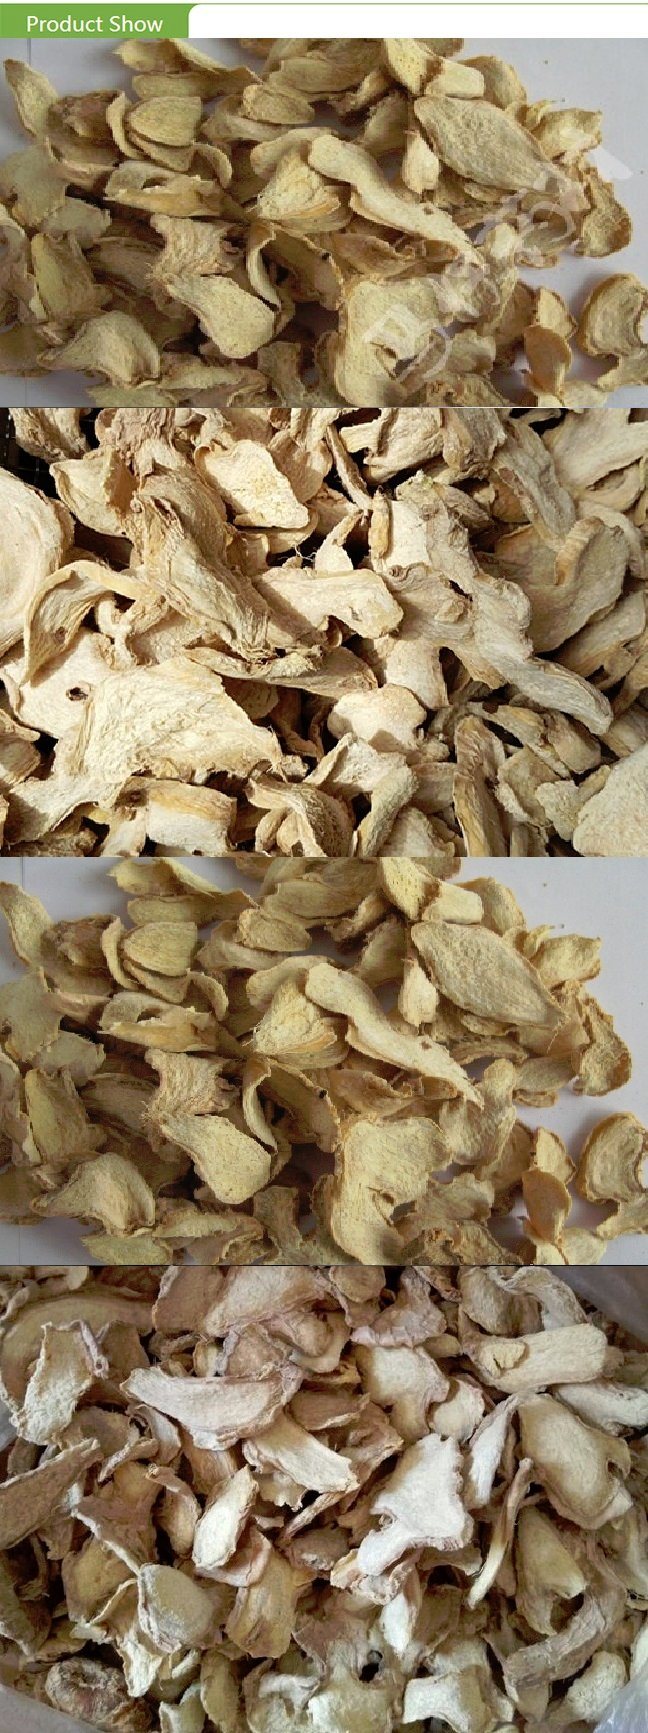 Export Standard Chinese Dehydrated Ginger Slices